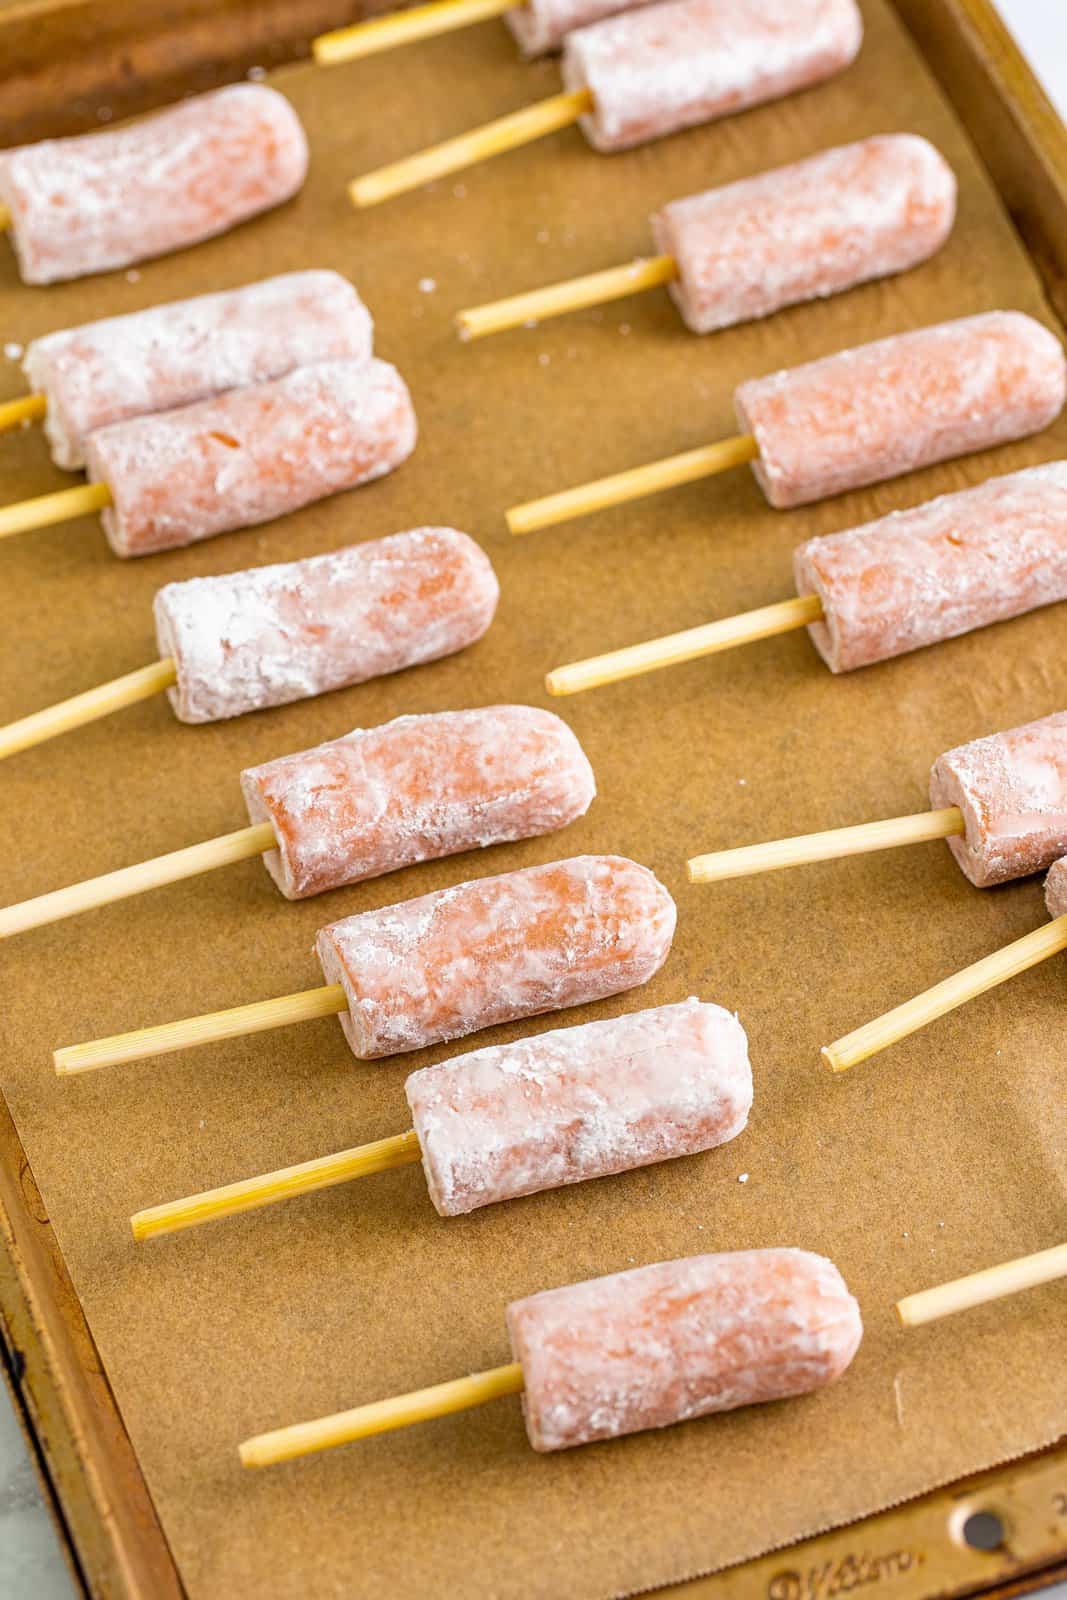 Skewers inserted into hot dogs on parchment lined sheet tray.